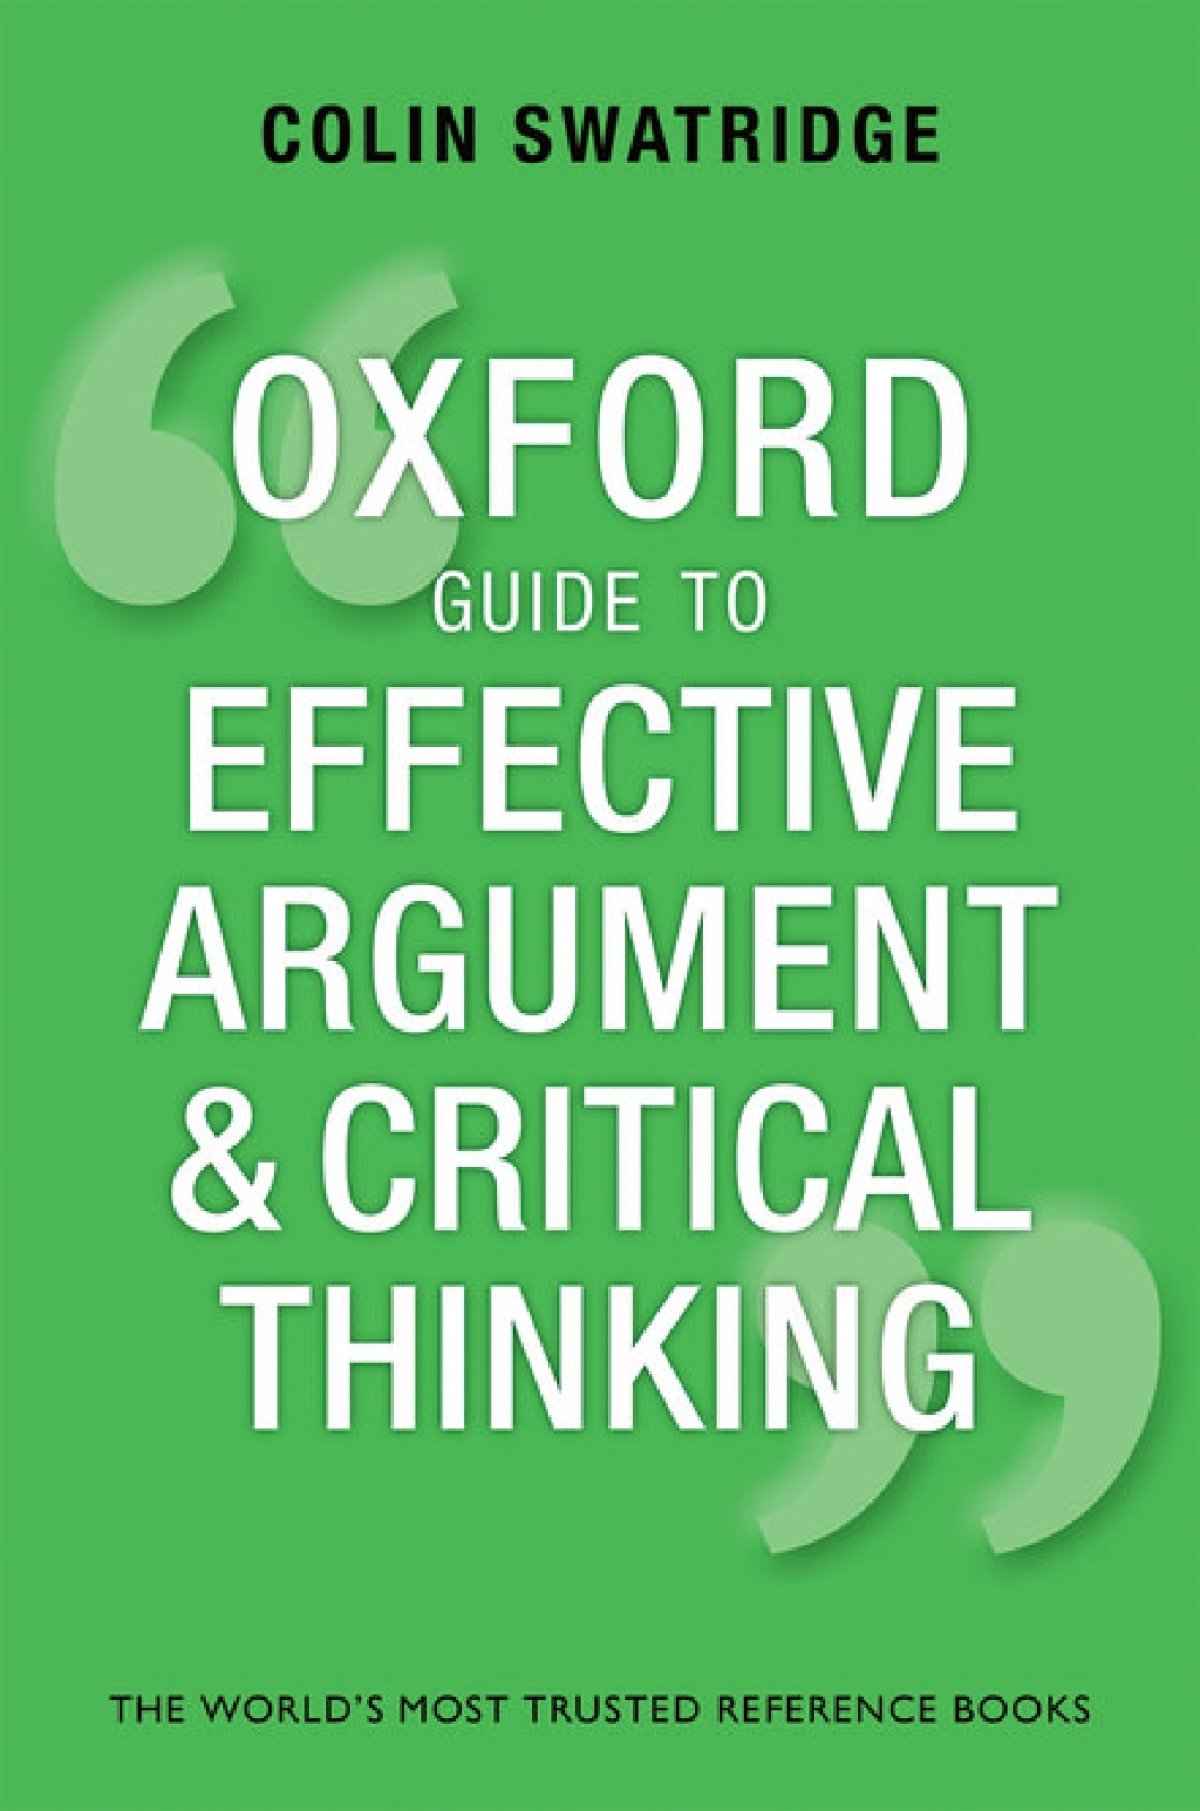 meaning of critical thinking in oxford dictionary